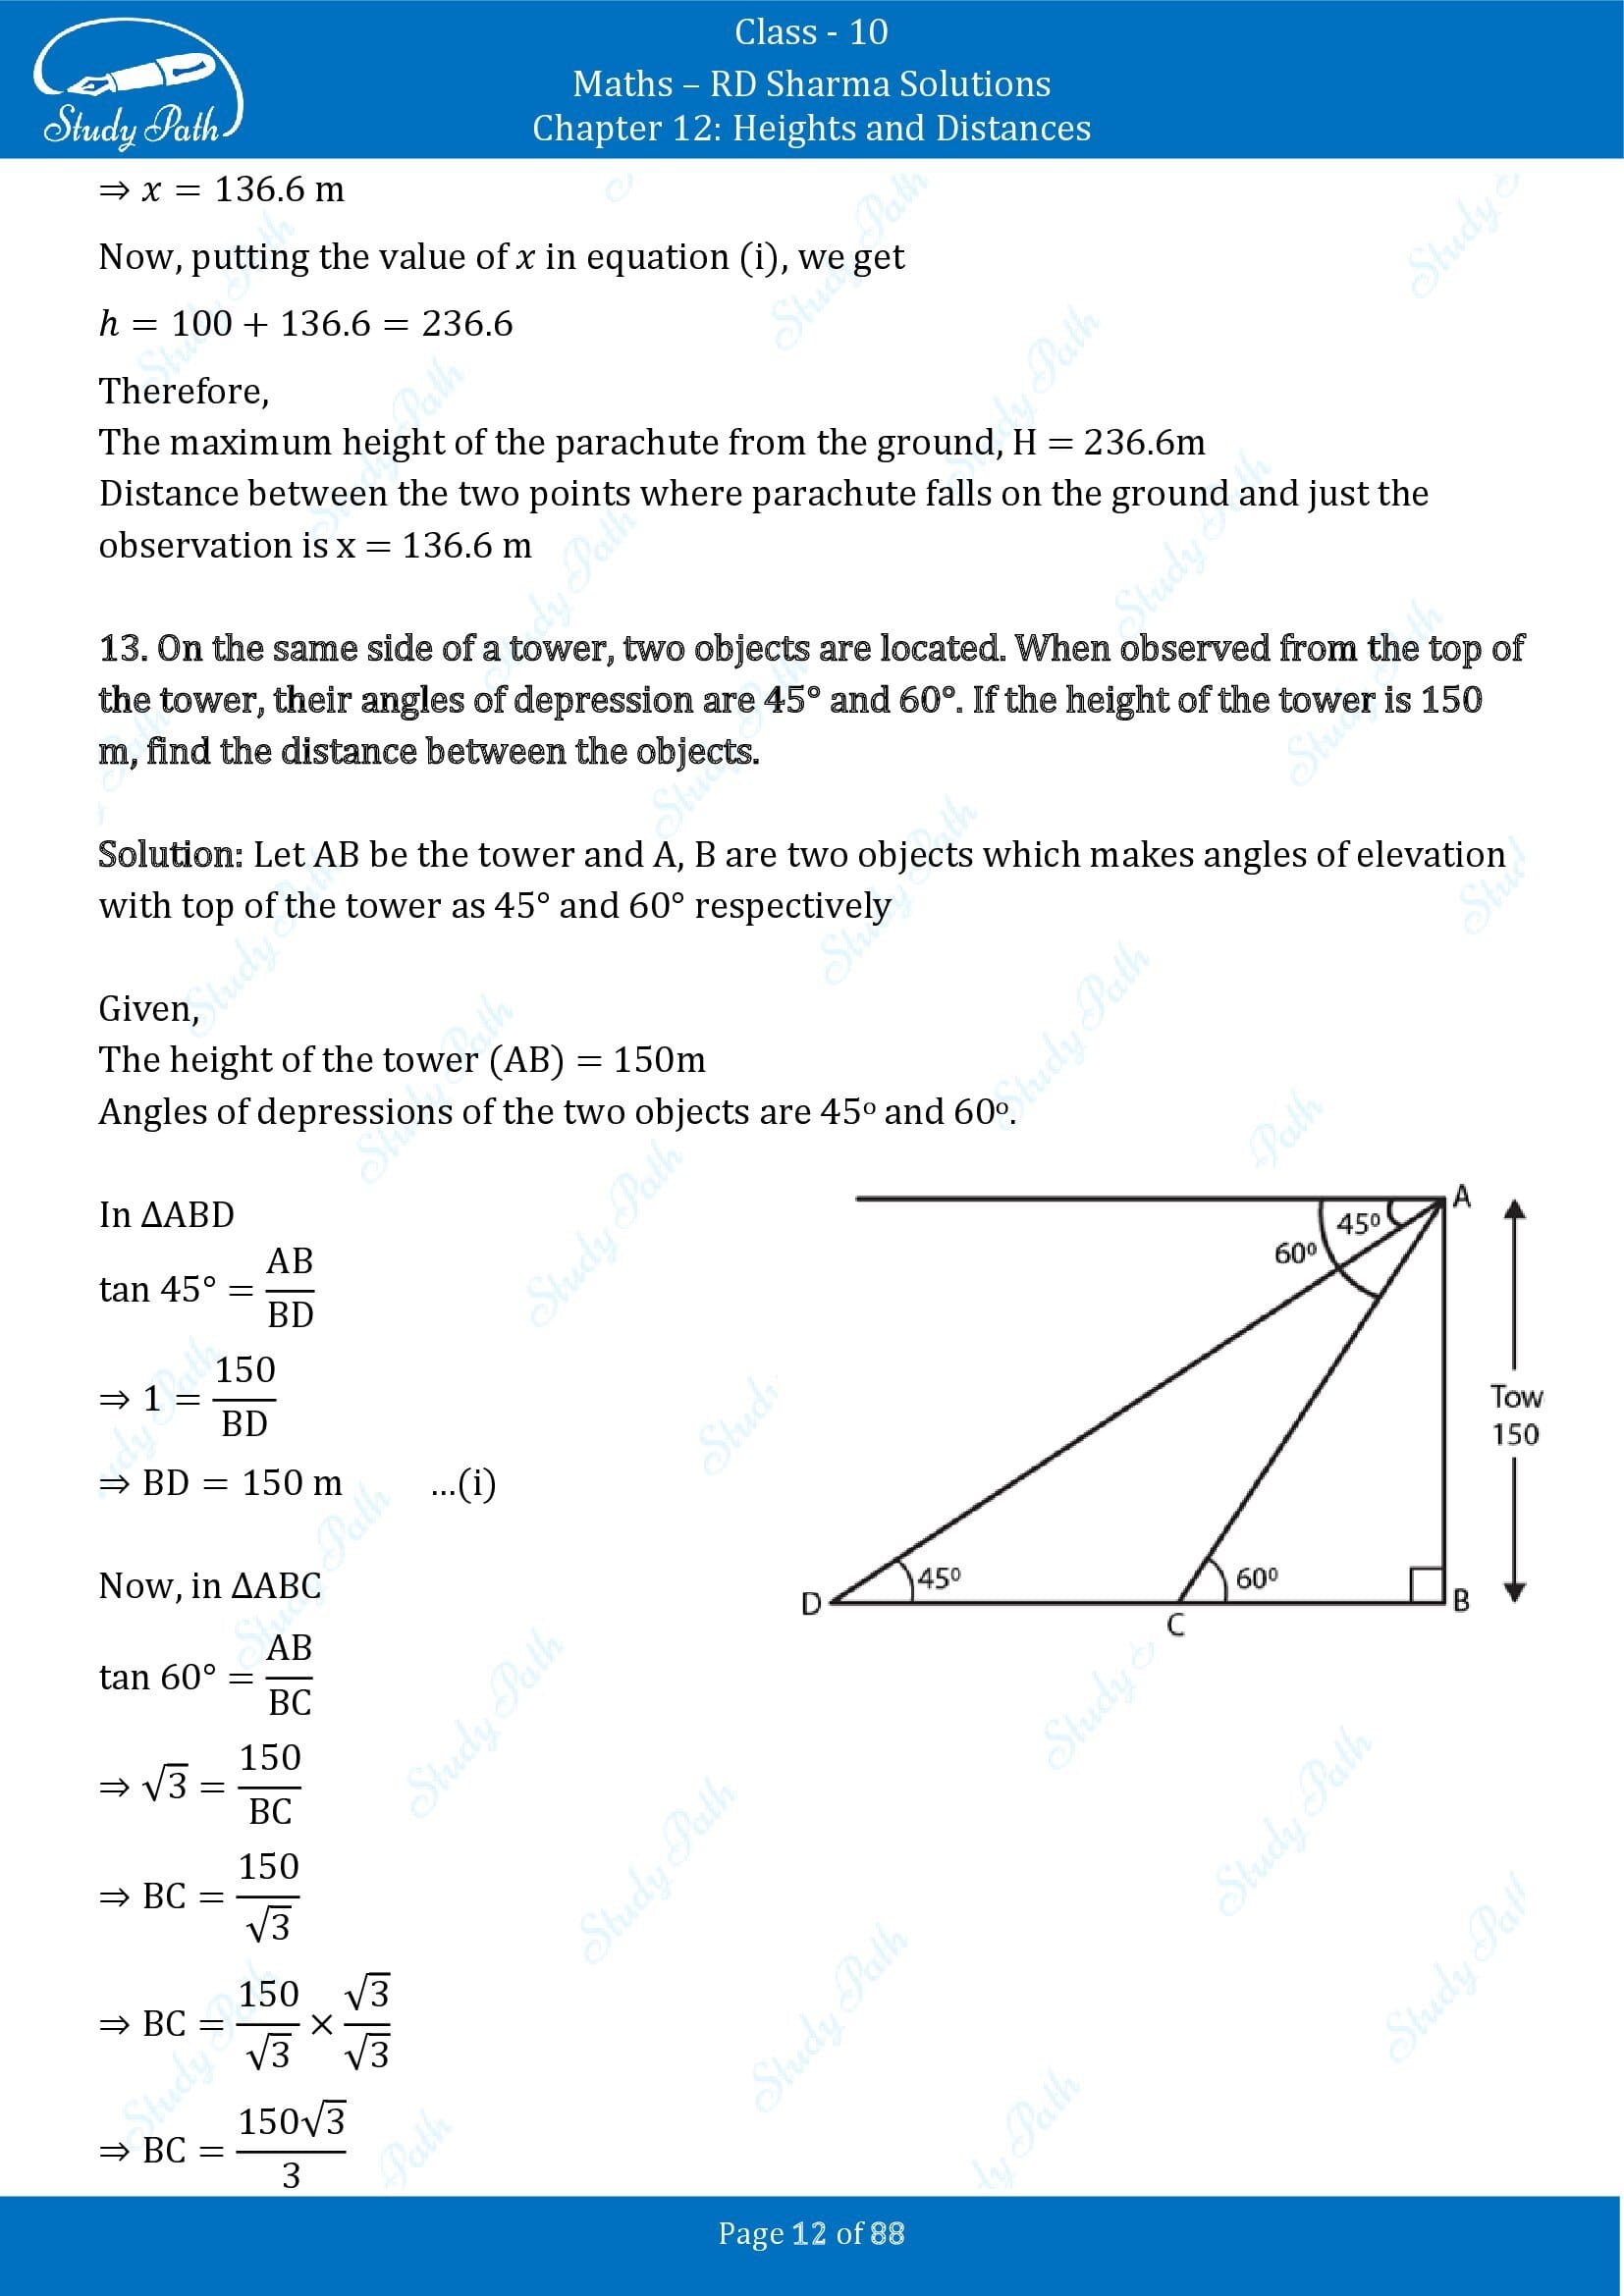 RD Sharma Solutions Class 10 Chapter 12 Heights and Distances Exercise 12.1 00012